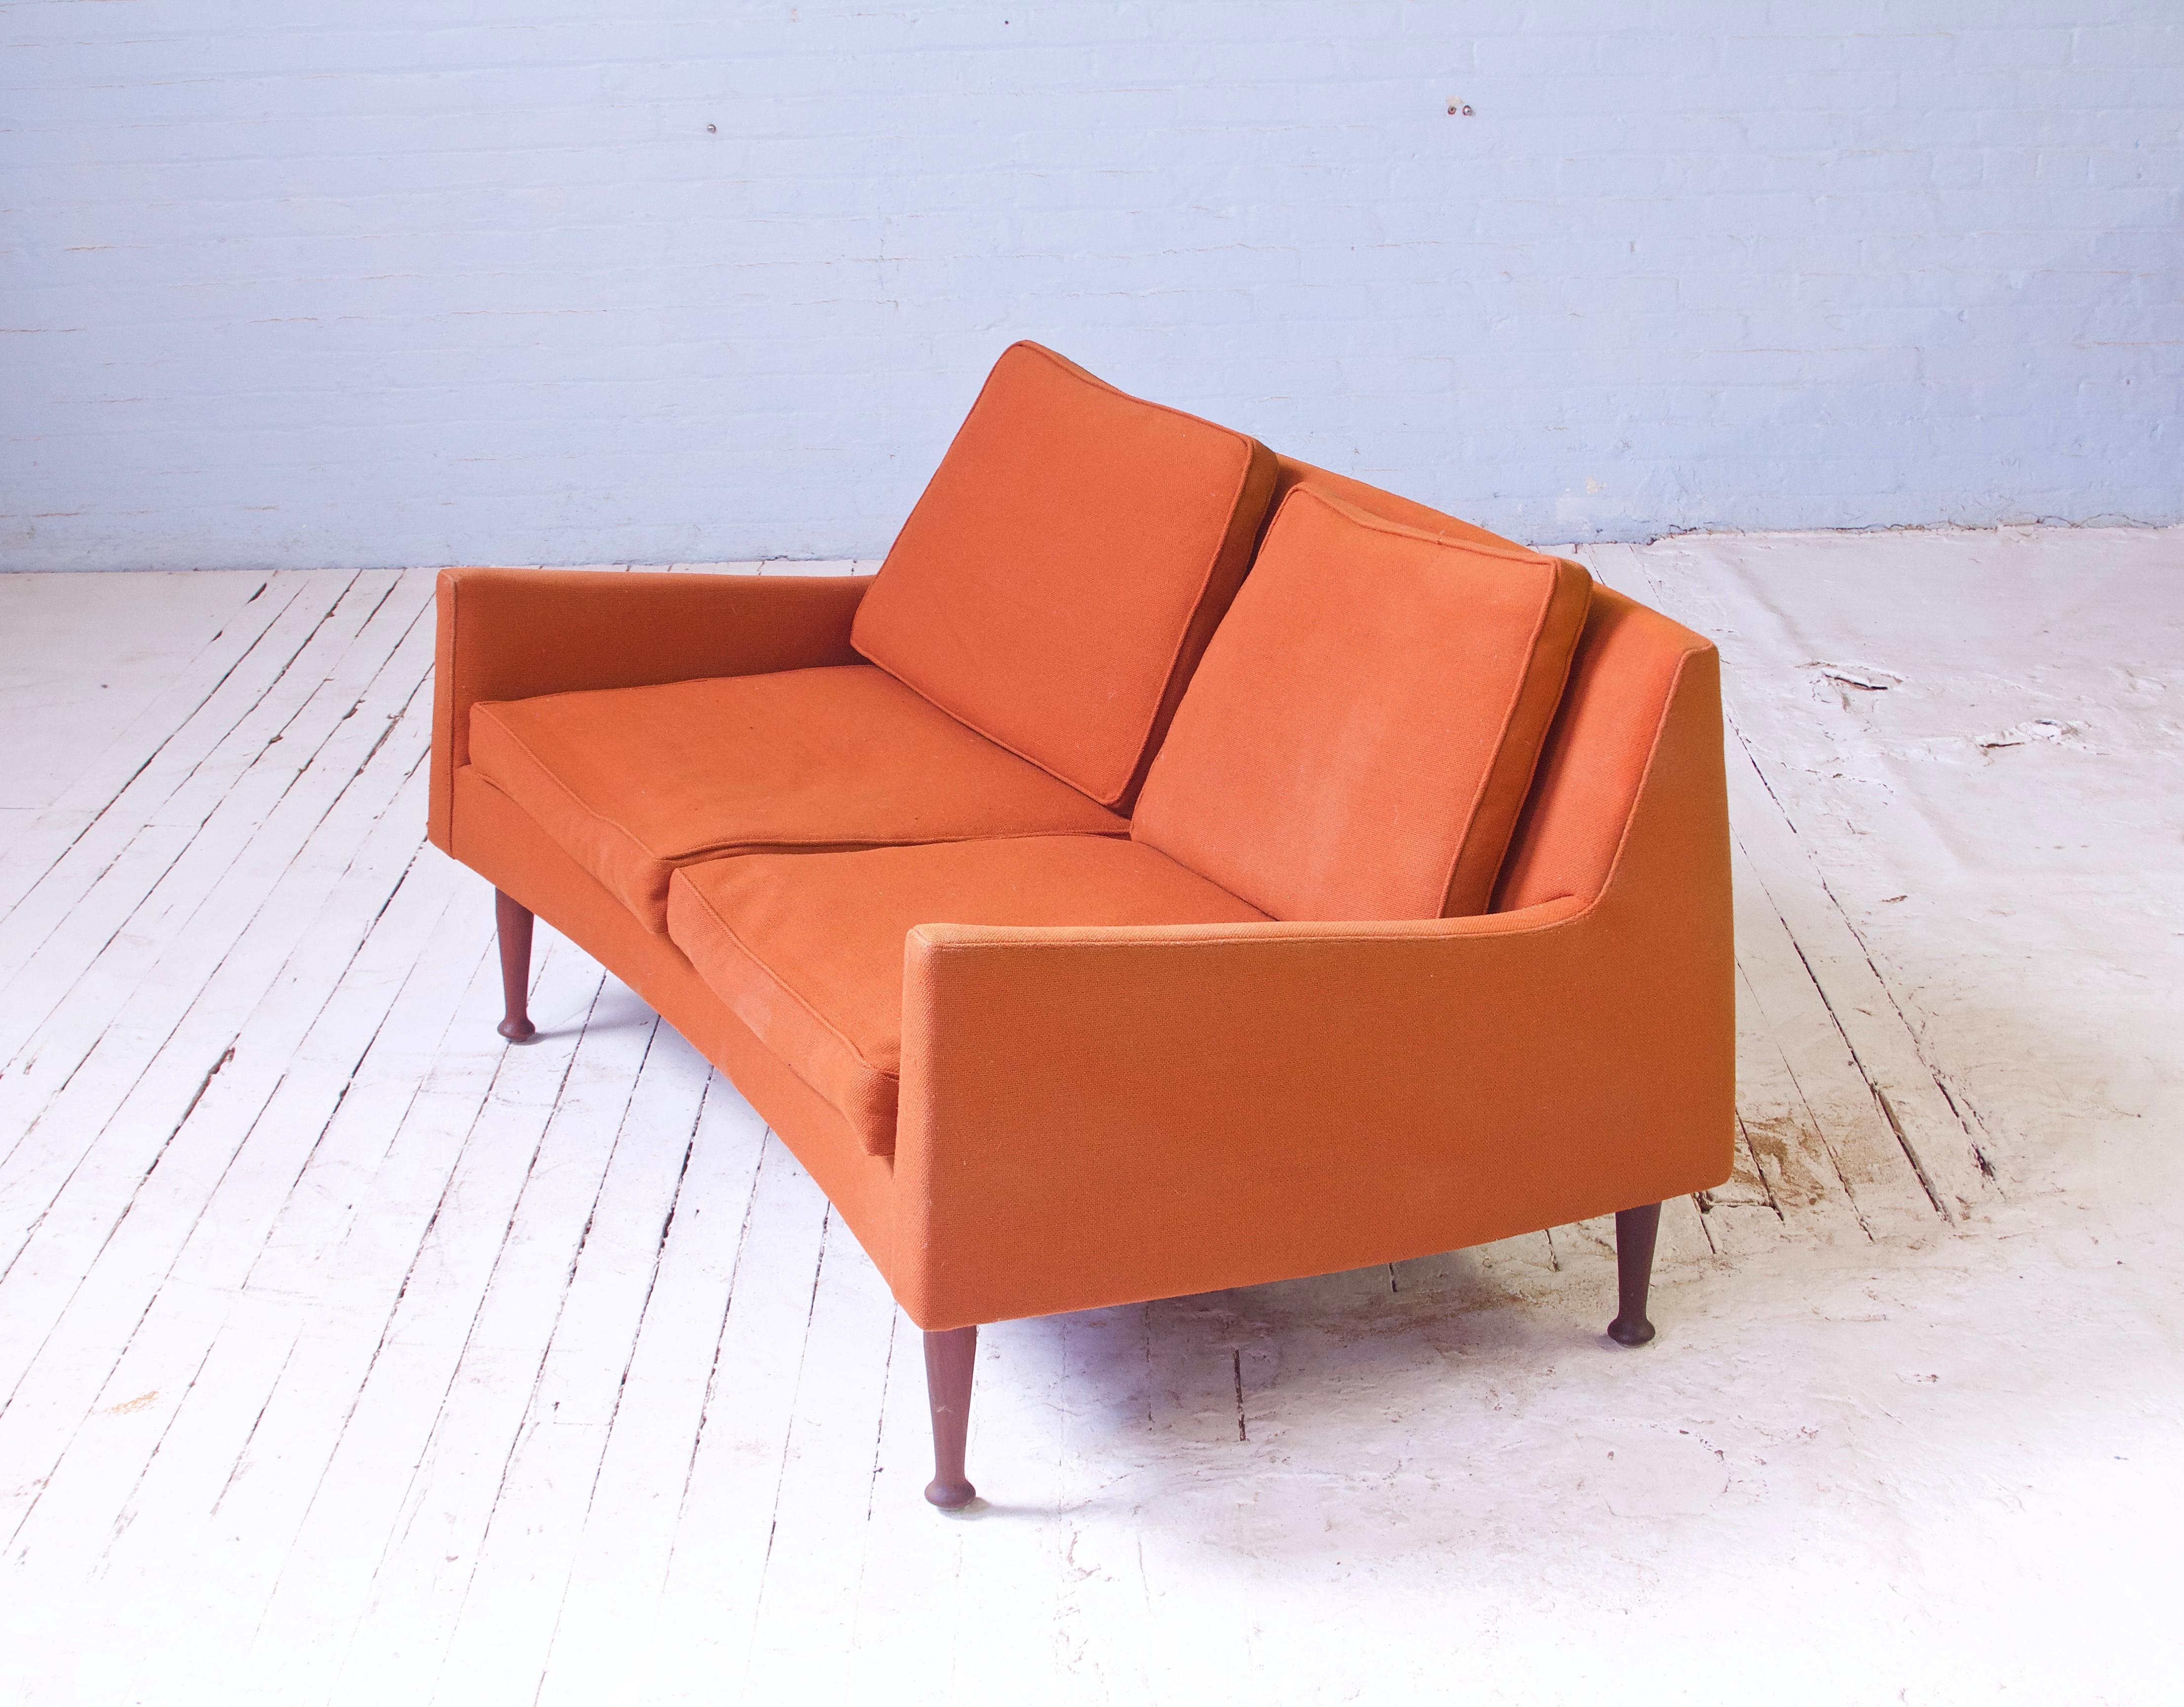 North American Rare Vintage Signed Jens Risom Settee in Walnut & Wool, 1950s